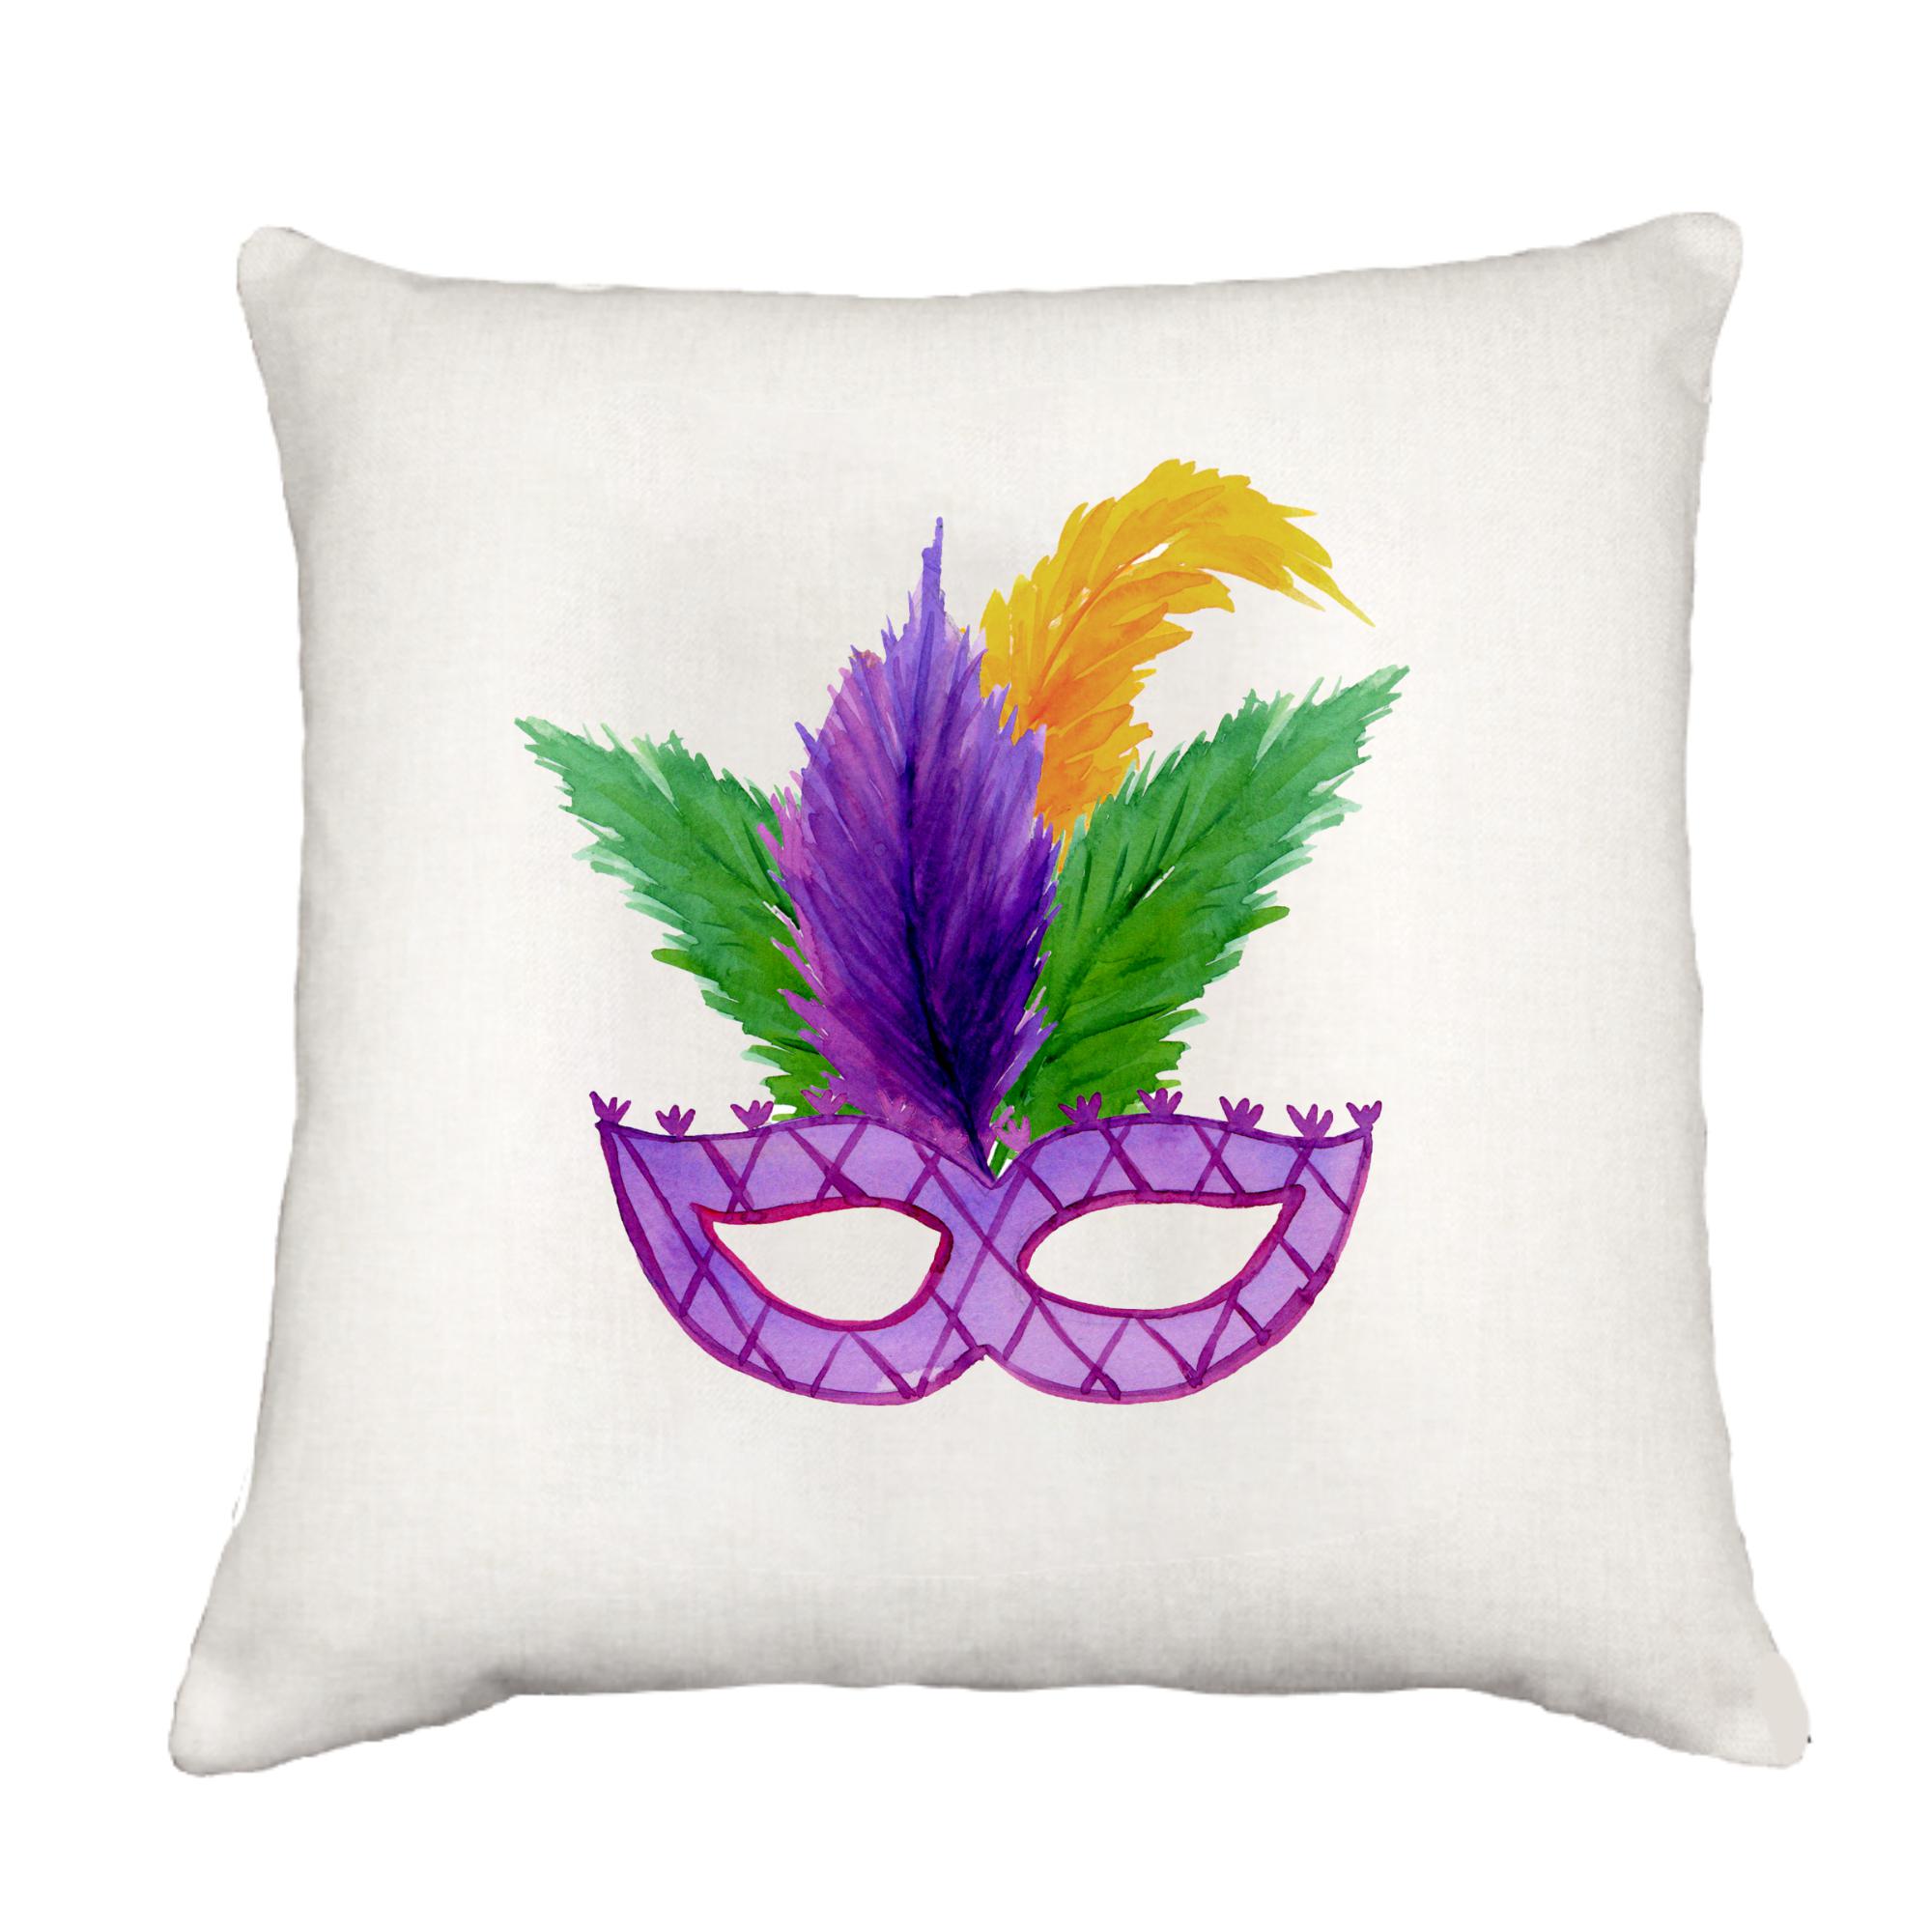 Mardi Gras Mask Cottage Pillow Throw/Decorative Pillow - Southern Sisters